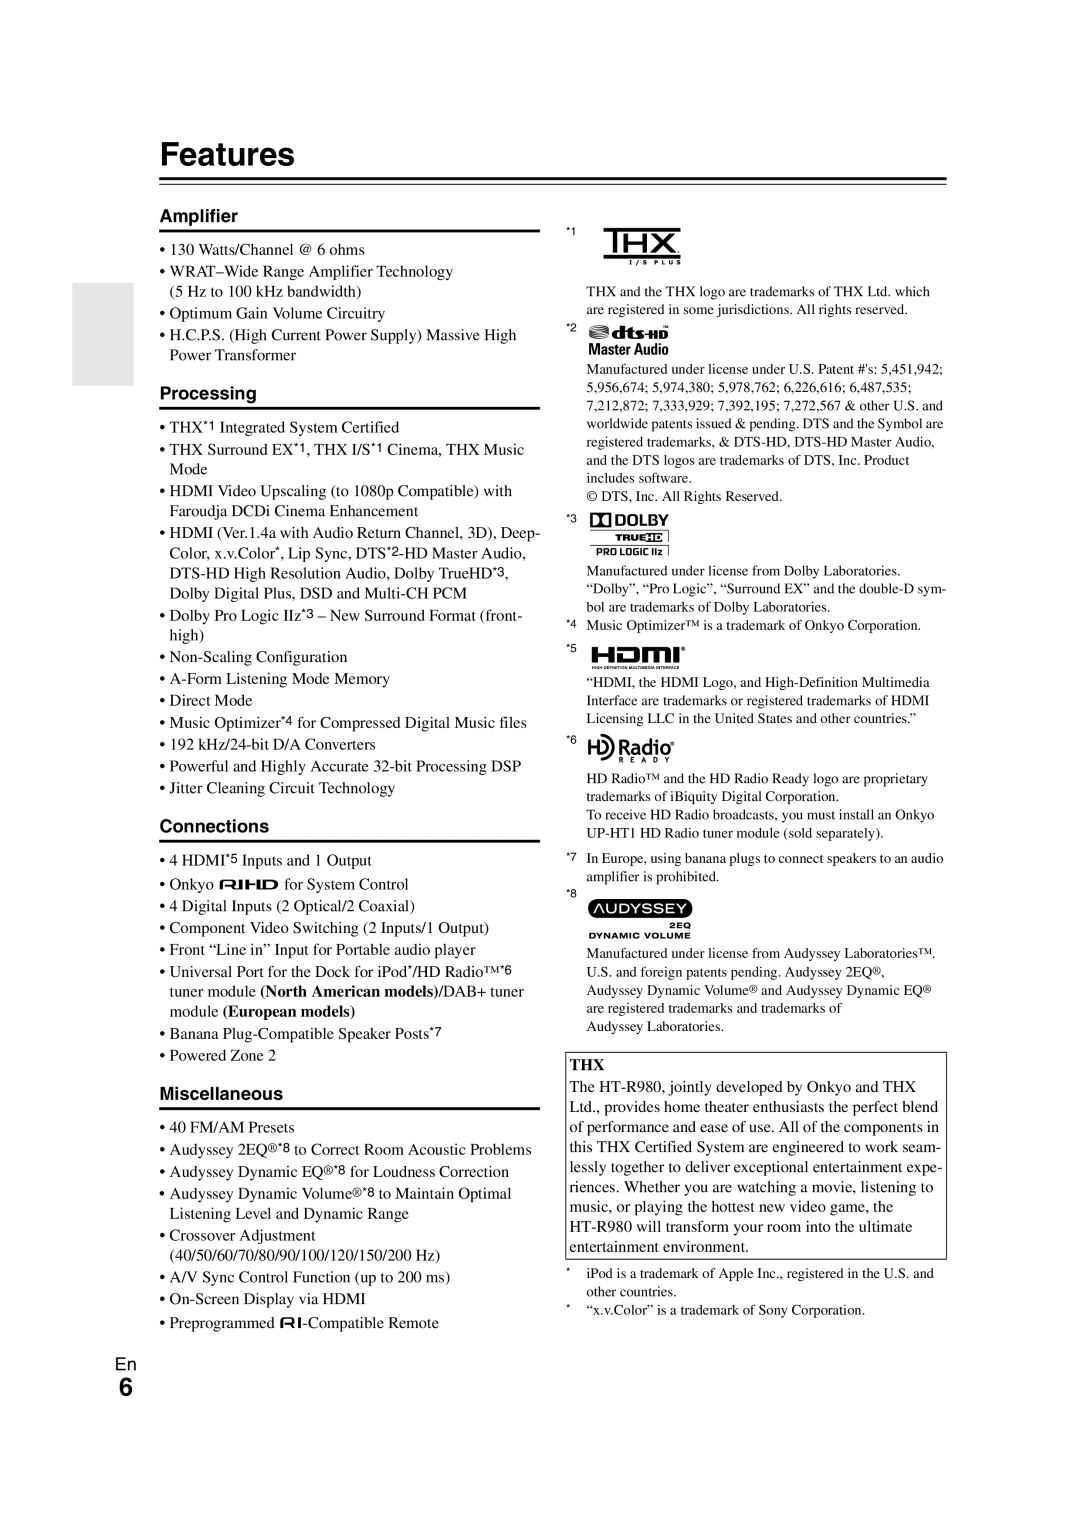 Onkyo HT-R980 instruction manual Features, Amplifier, Processing, Miscellaneous, Connections 